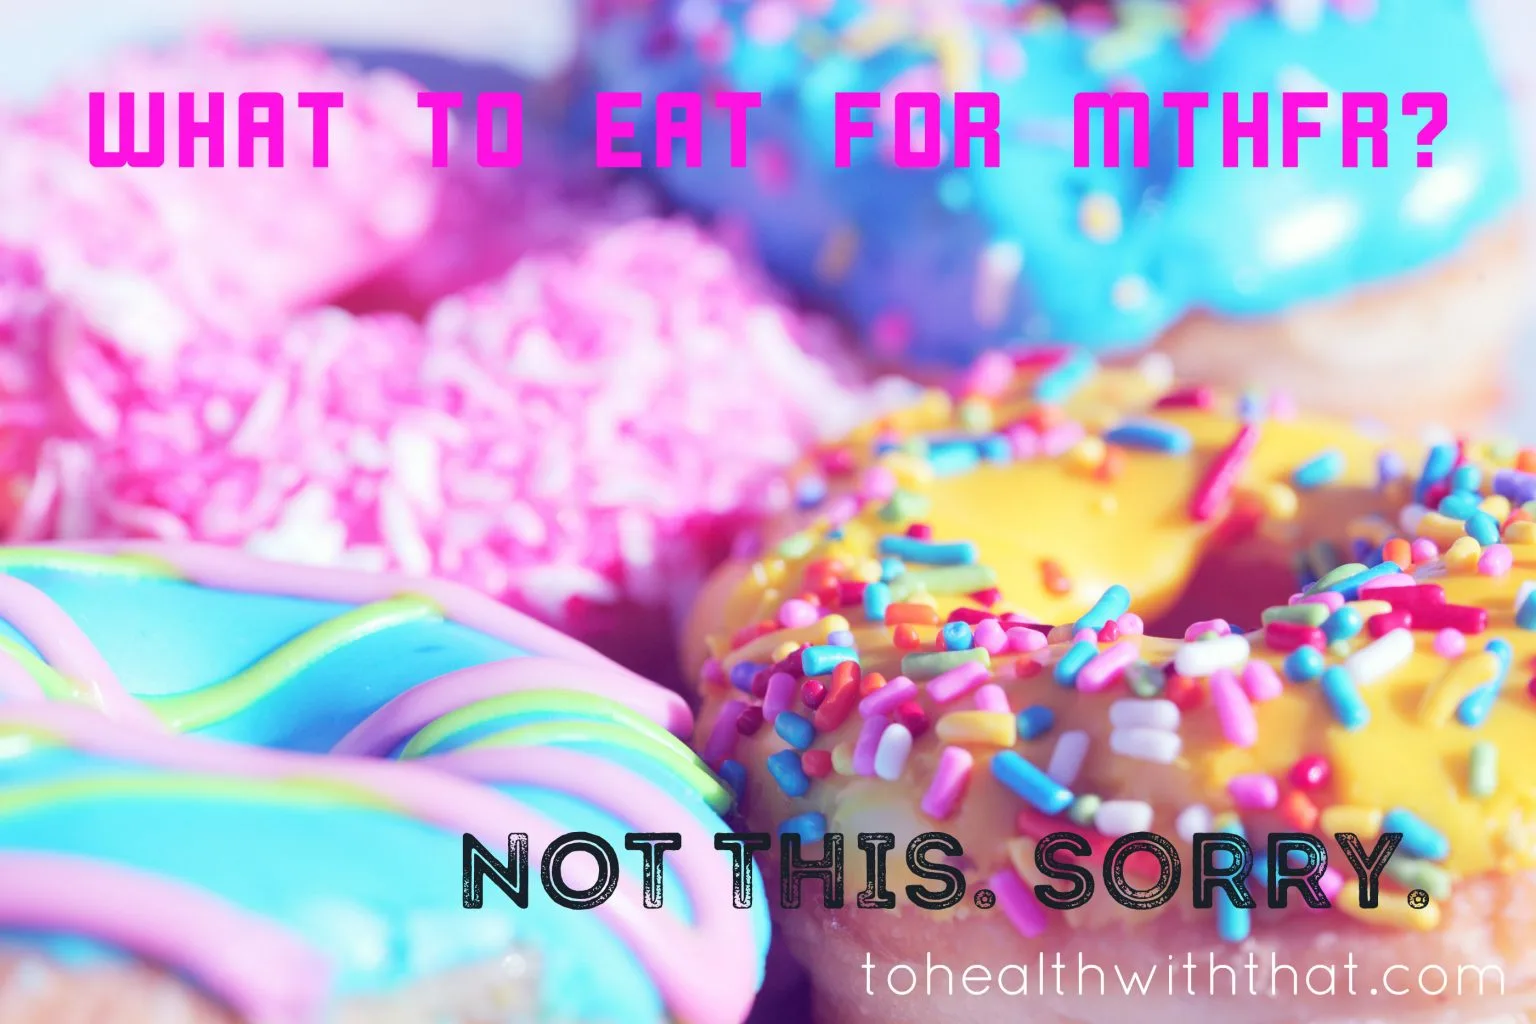 What to eat for MTHFR is NOT doughnuts.